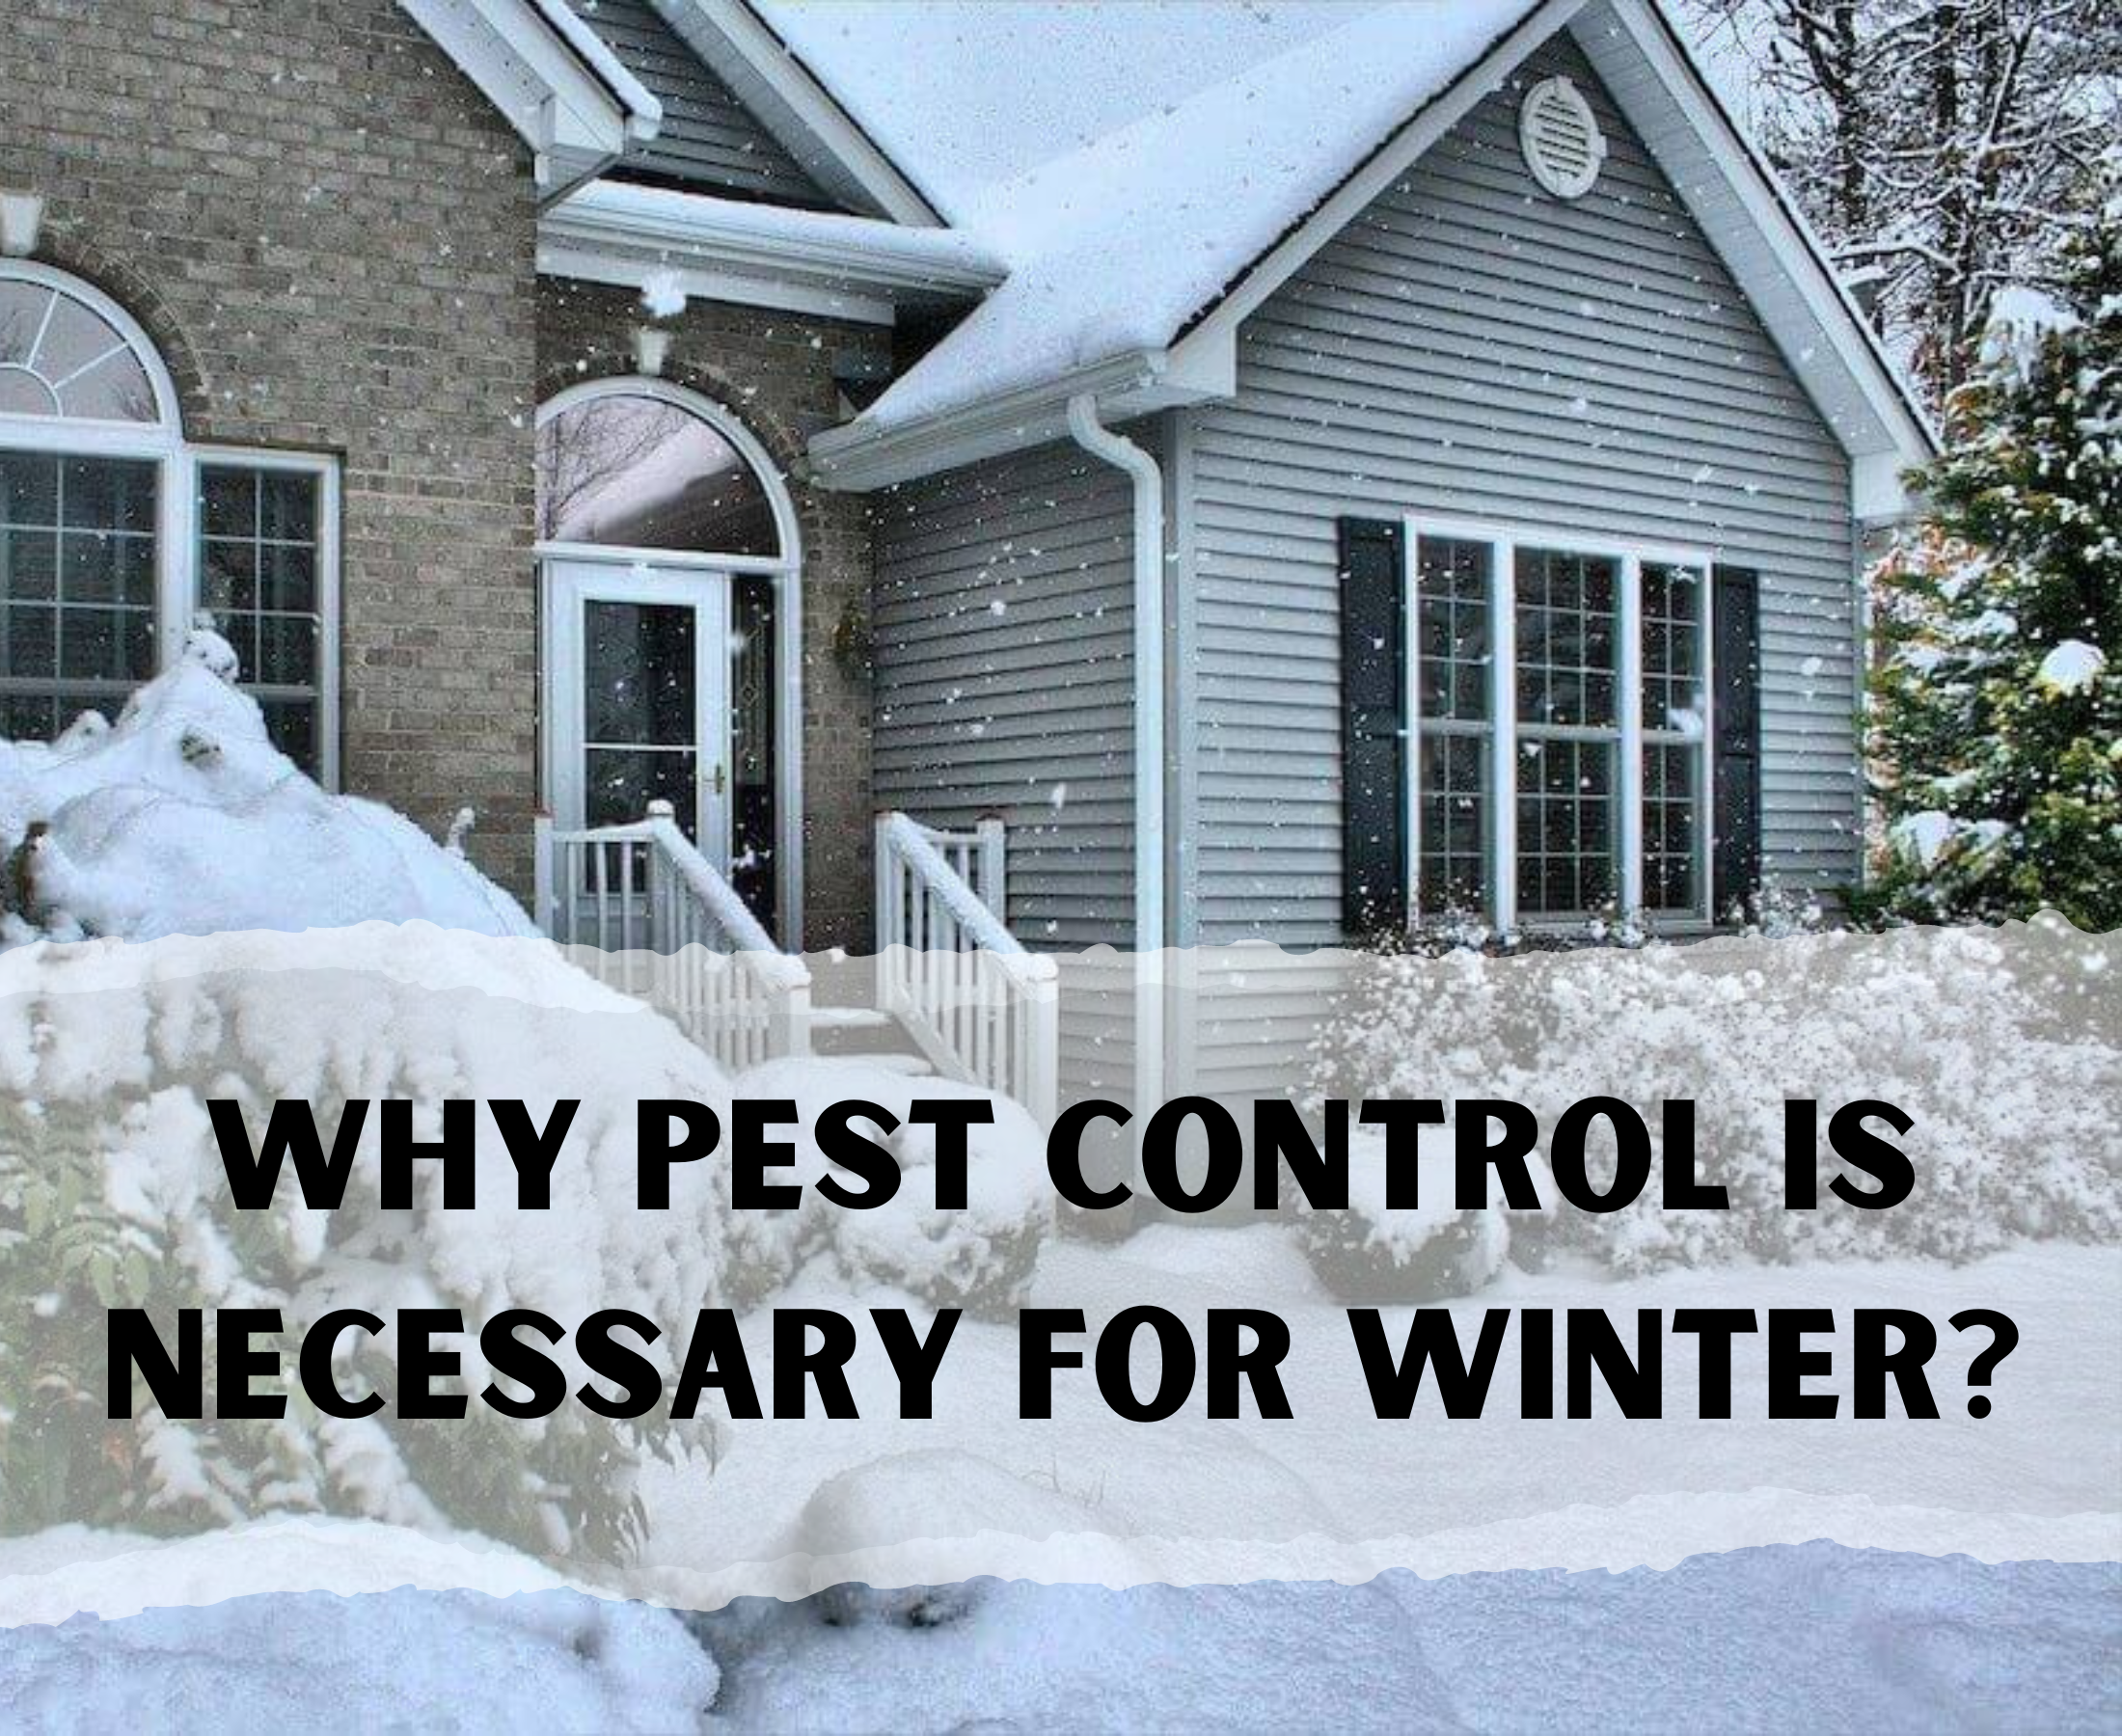 Why do you need to keep pest control in winter?